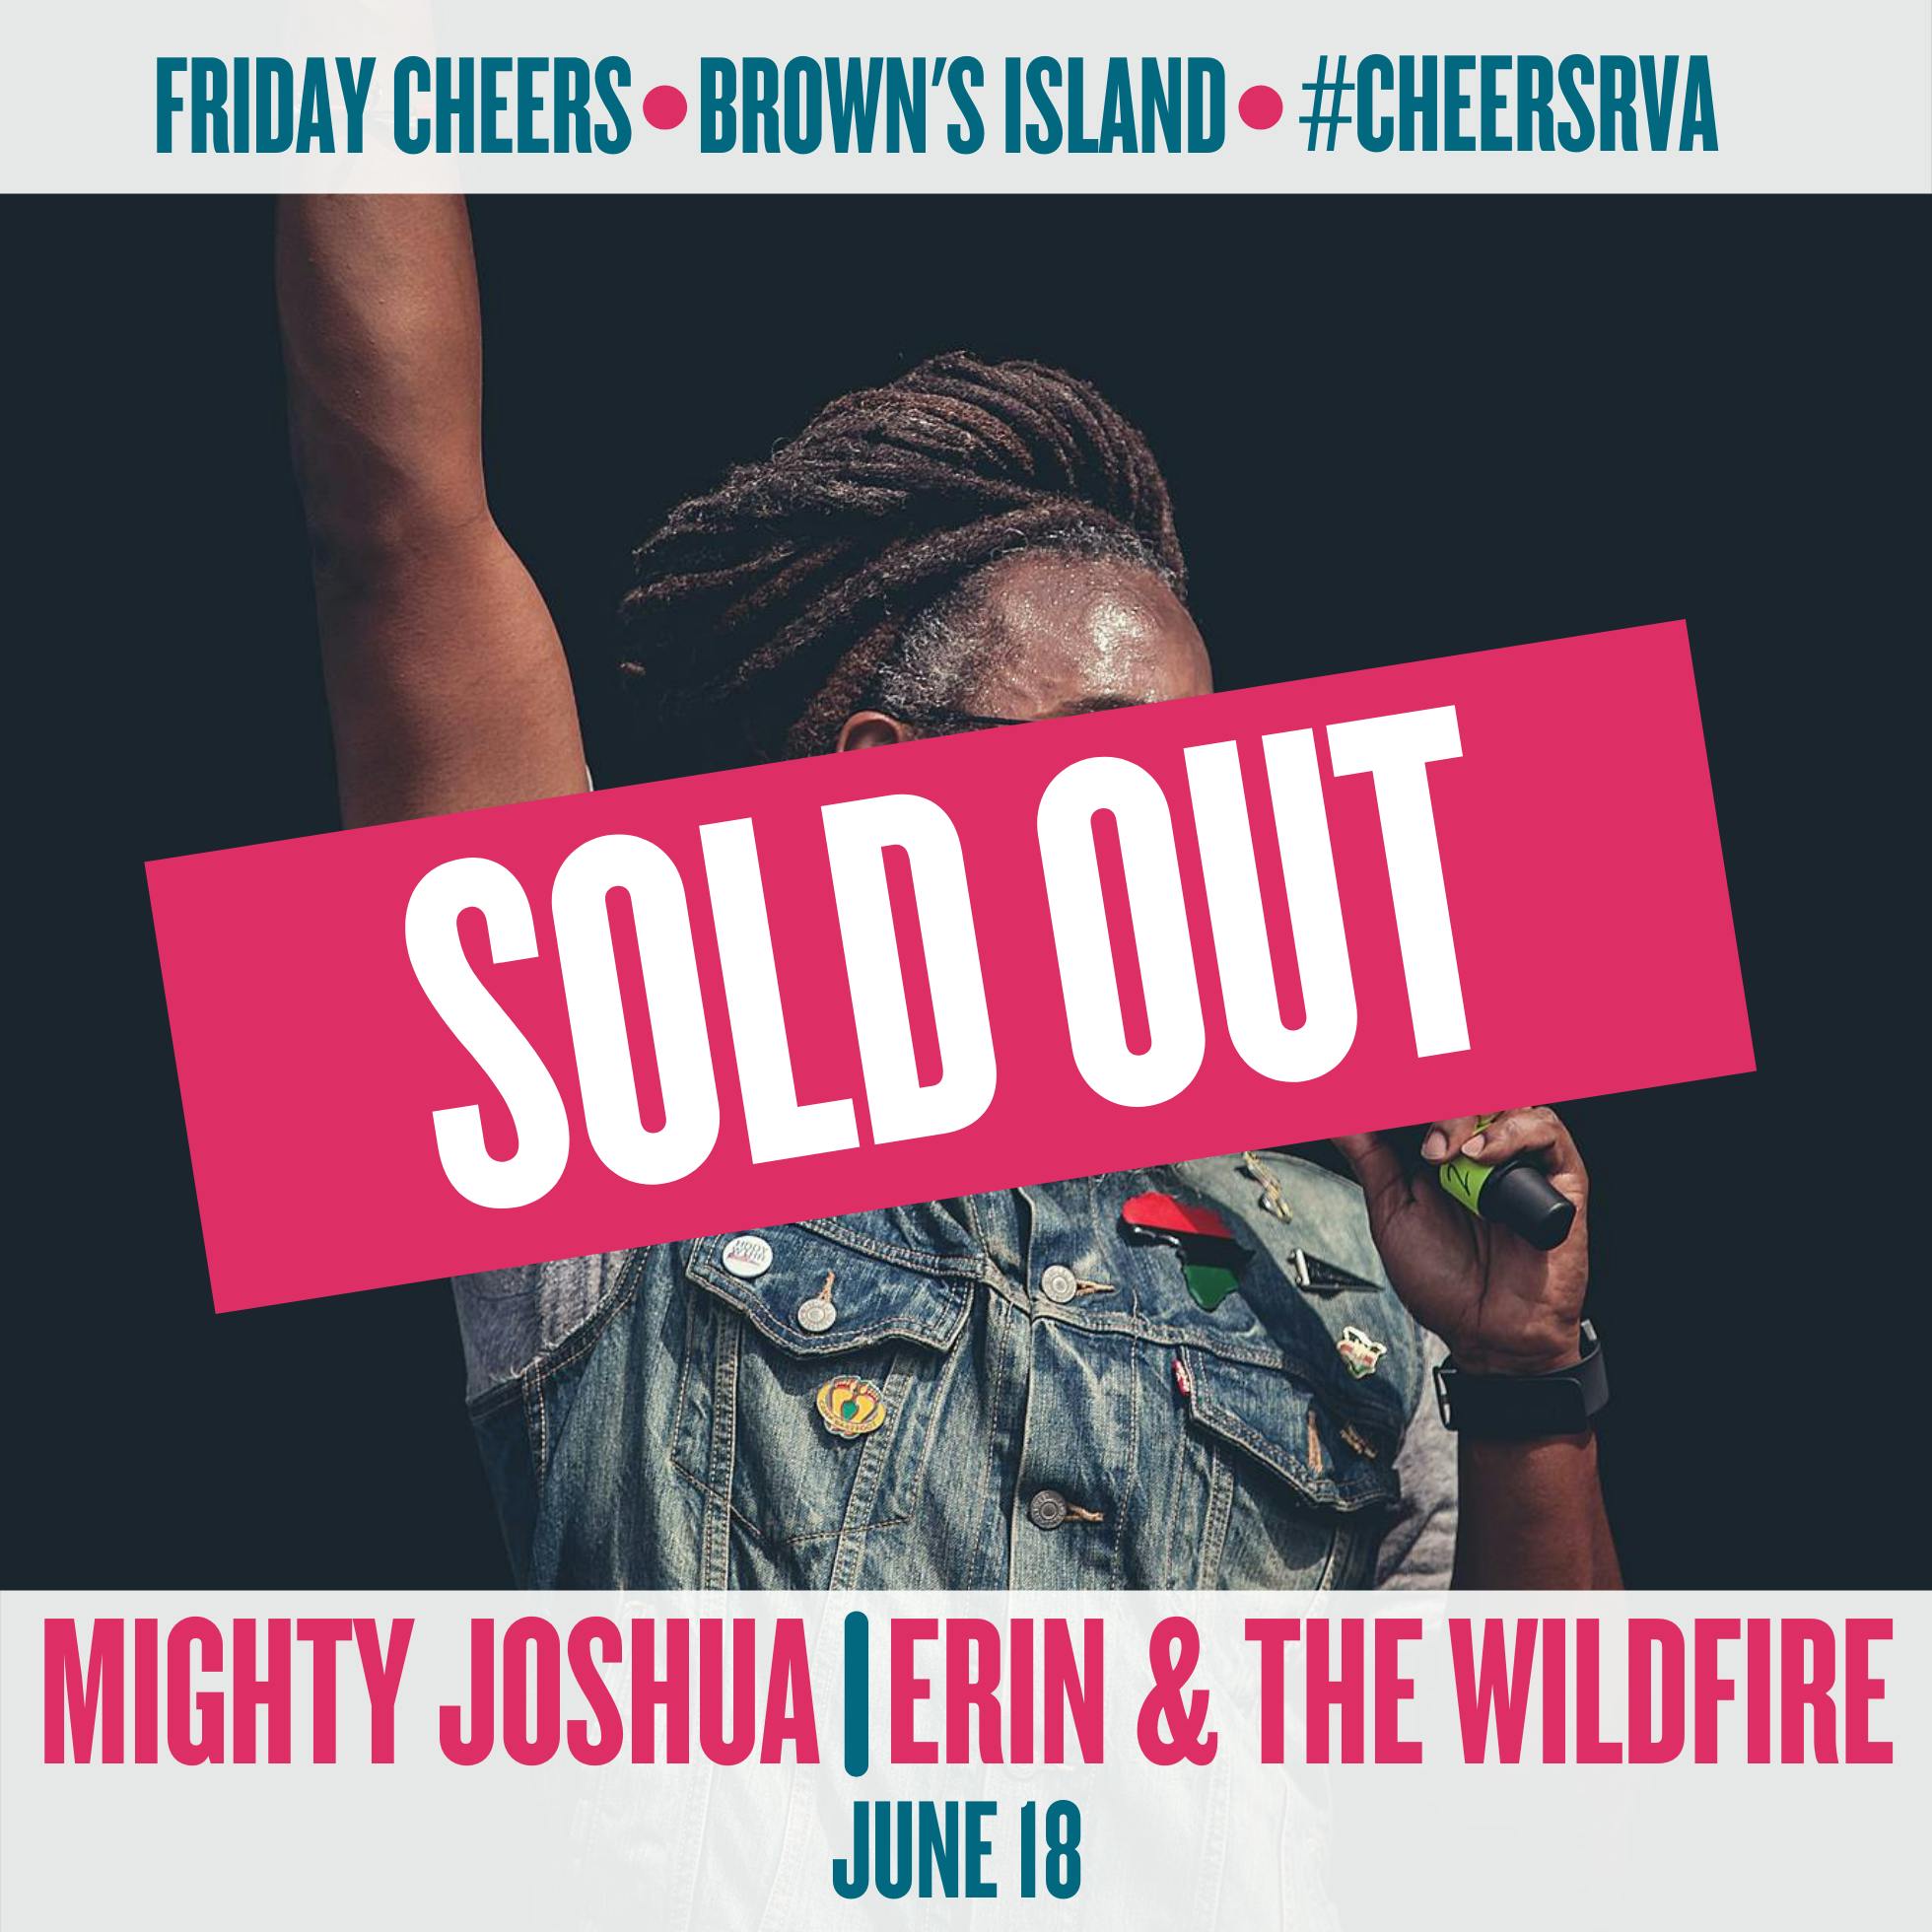 Mighty Joshua and Erin and the Wildfire